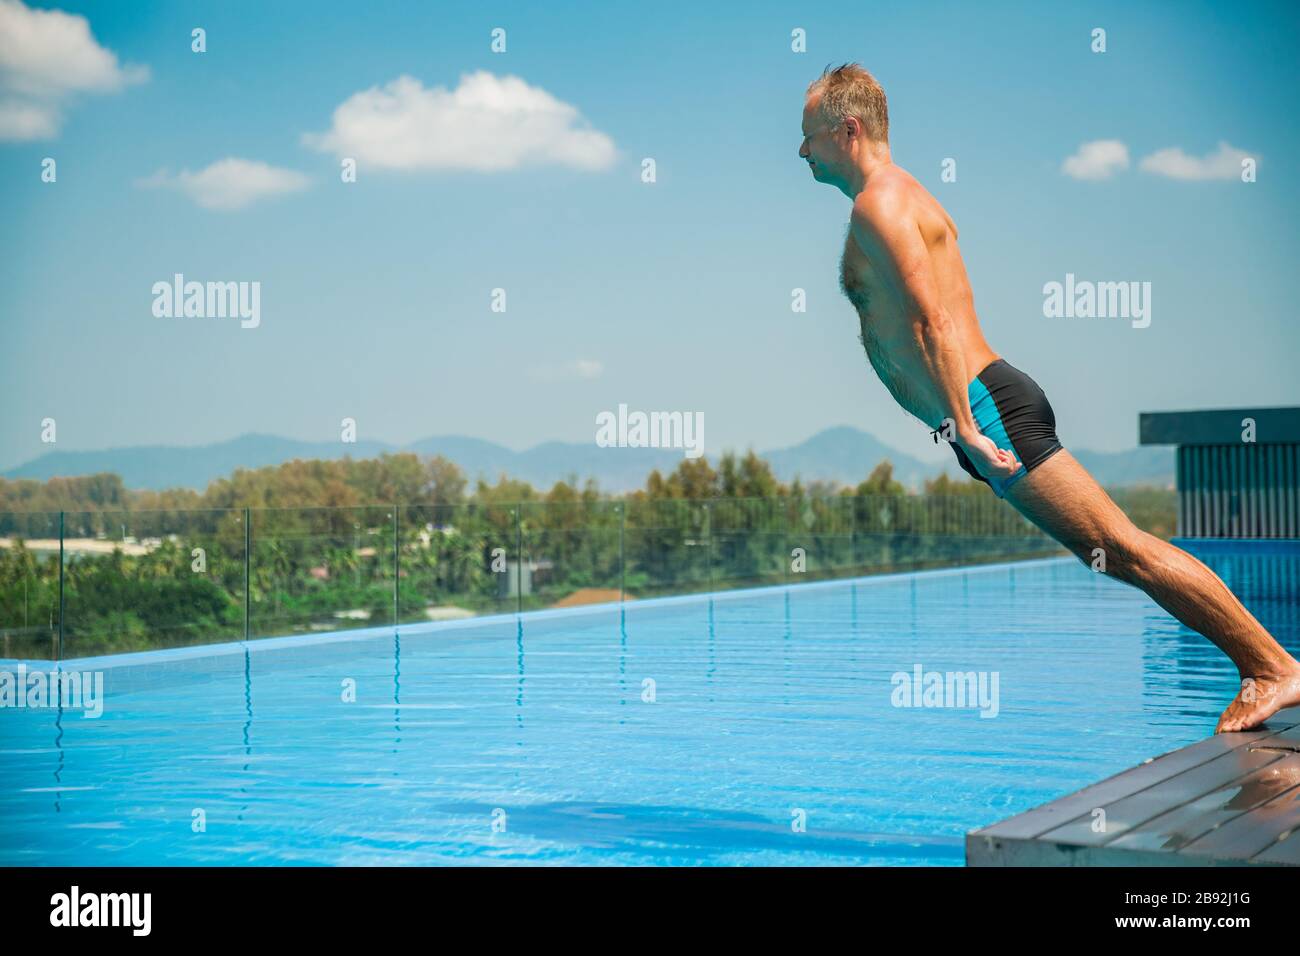 Unemotional funny man falling into swimming pool. Summer vacation Stock Photo